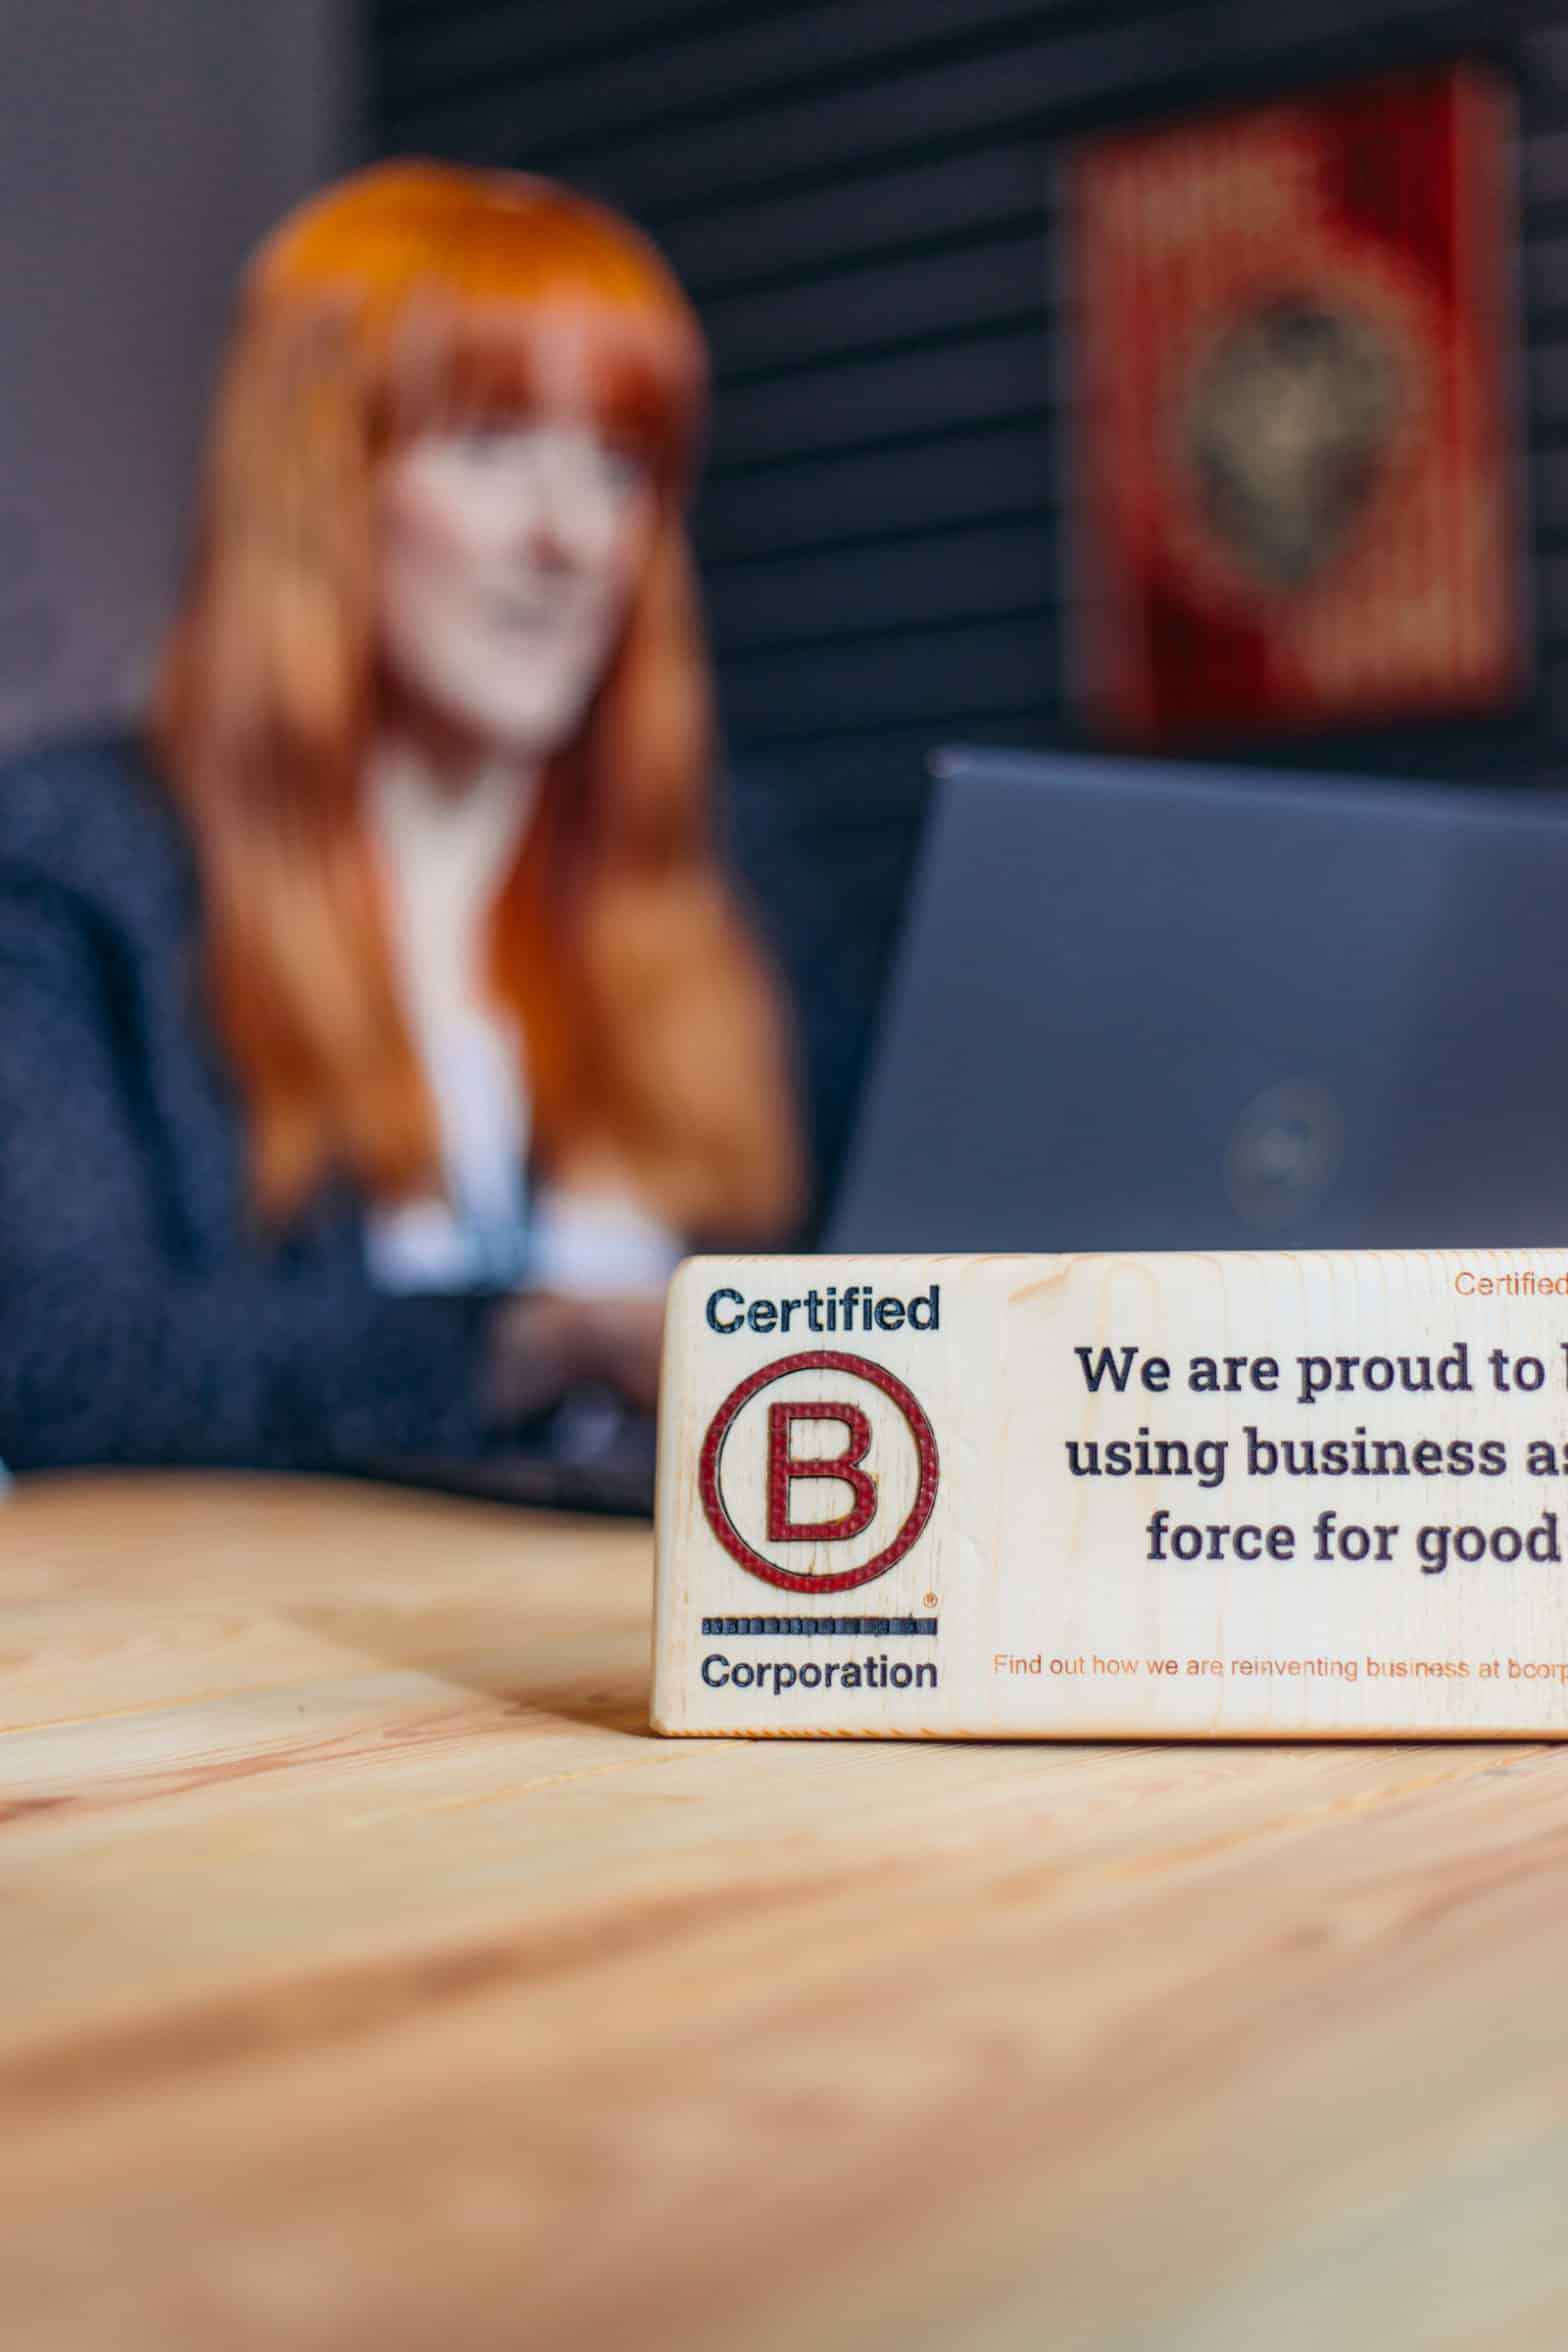 Natalie in the background typing on a laptop with a wooden plaque saying "Certified B Corporation. Certified in 2021 We are proud to be a business as a force for good. Find out how we are reinventing business at bcorporation.co.uk